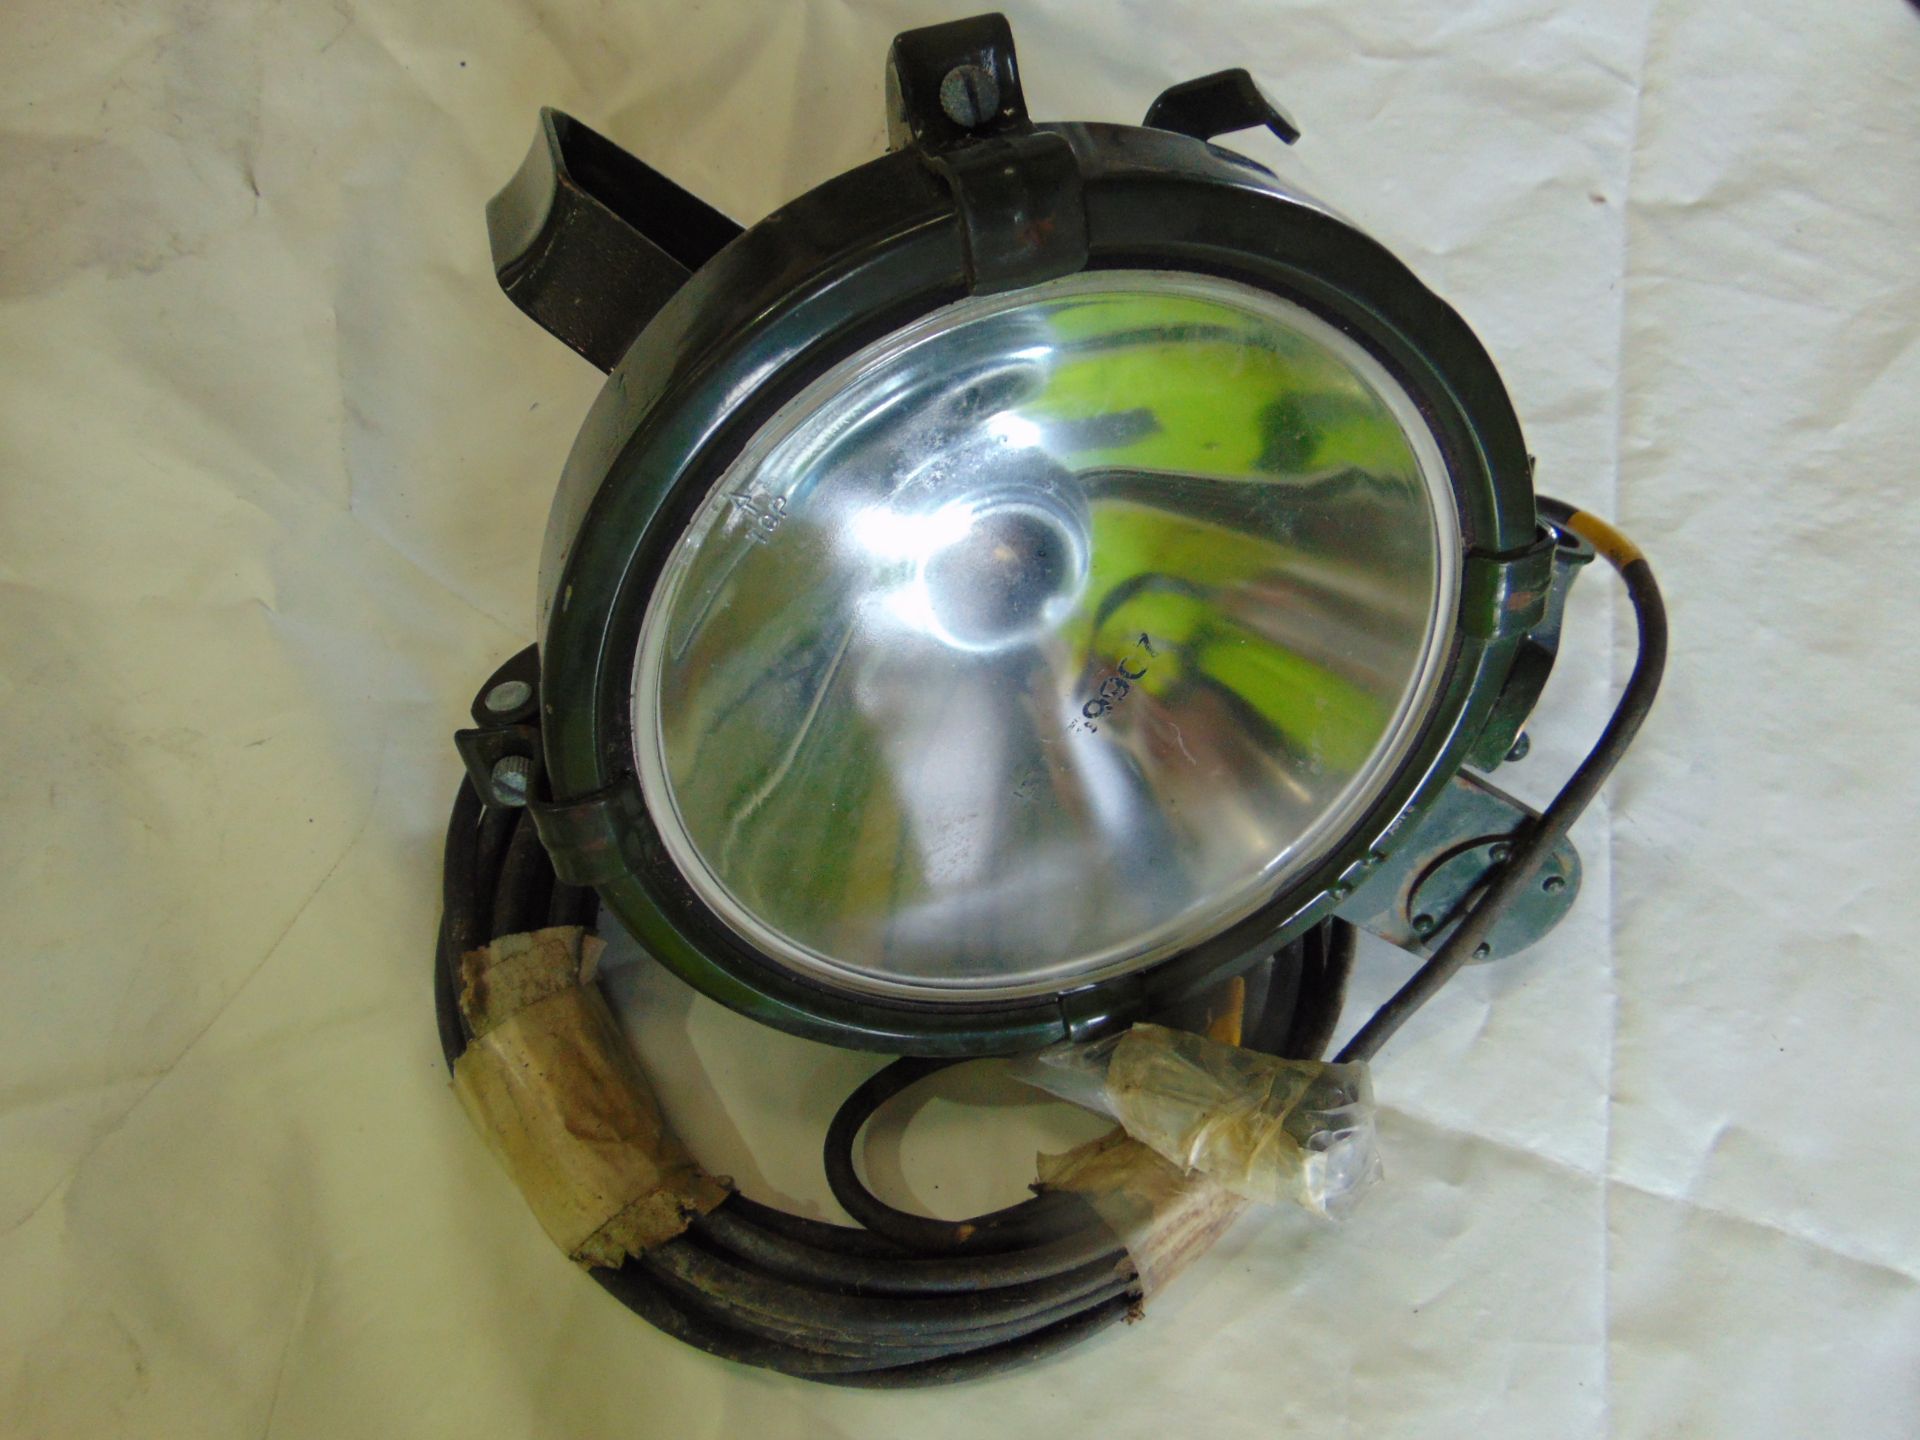 UNUSED FV ISSUED SEARCHLIGHT A1 CONDITION C/W BRACKET, LEAD AND PLUG - Image 2 of 5